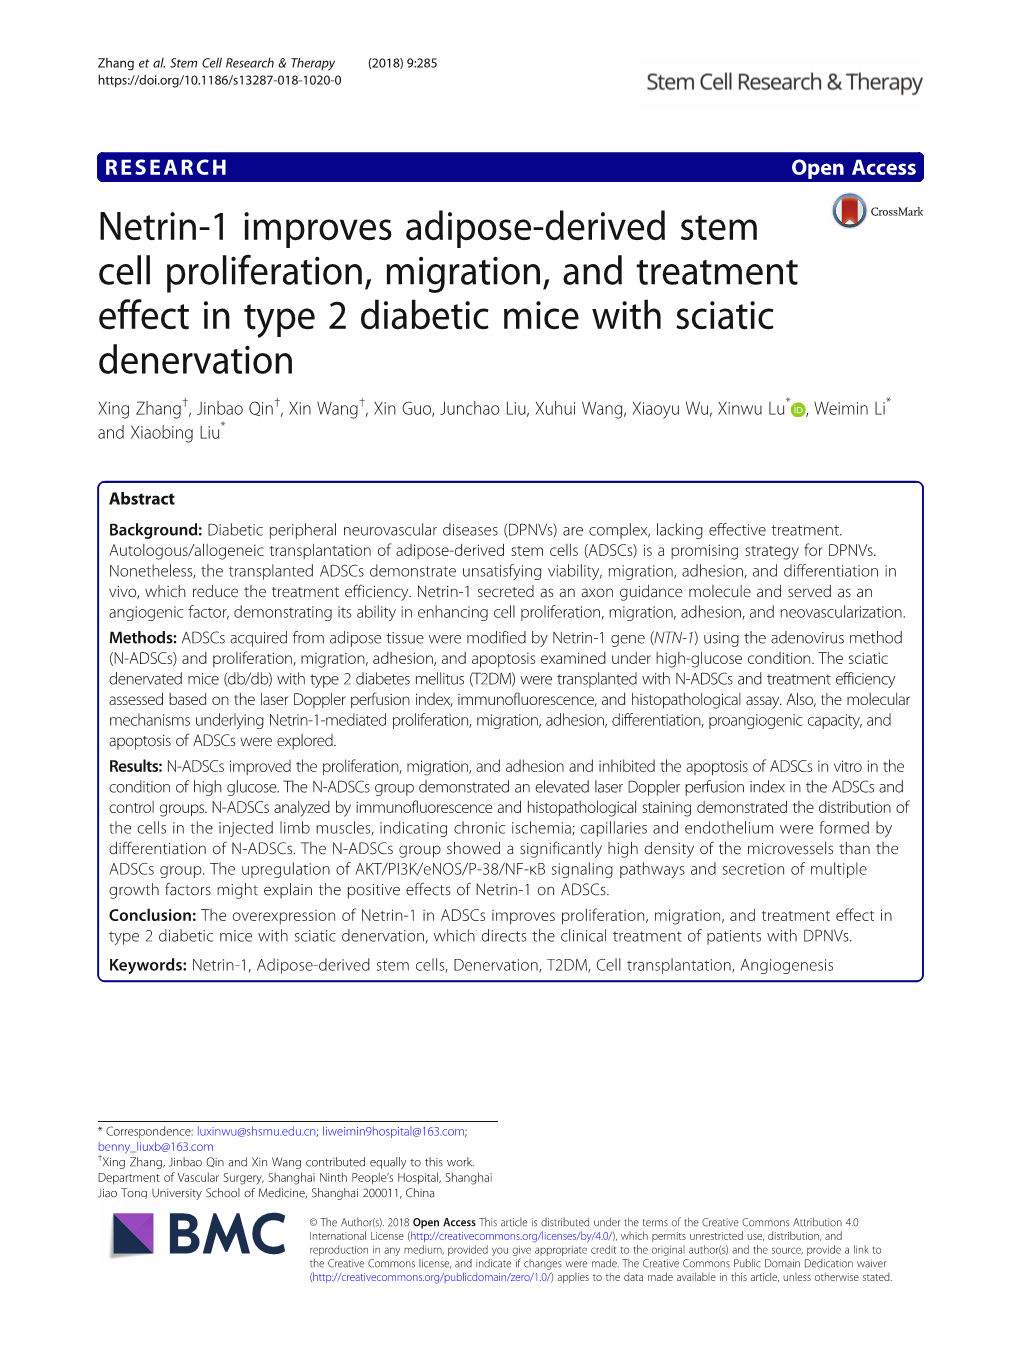 Netrin-1 Improves Adipose-Derived Stem Cell Proliferation, Migration, and Treatment Effect in Type 2 Diabetic Mice with Sciatic